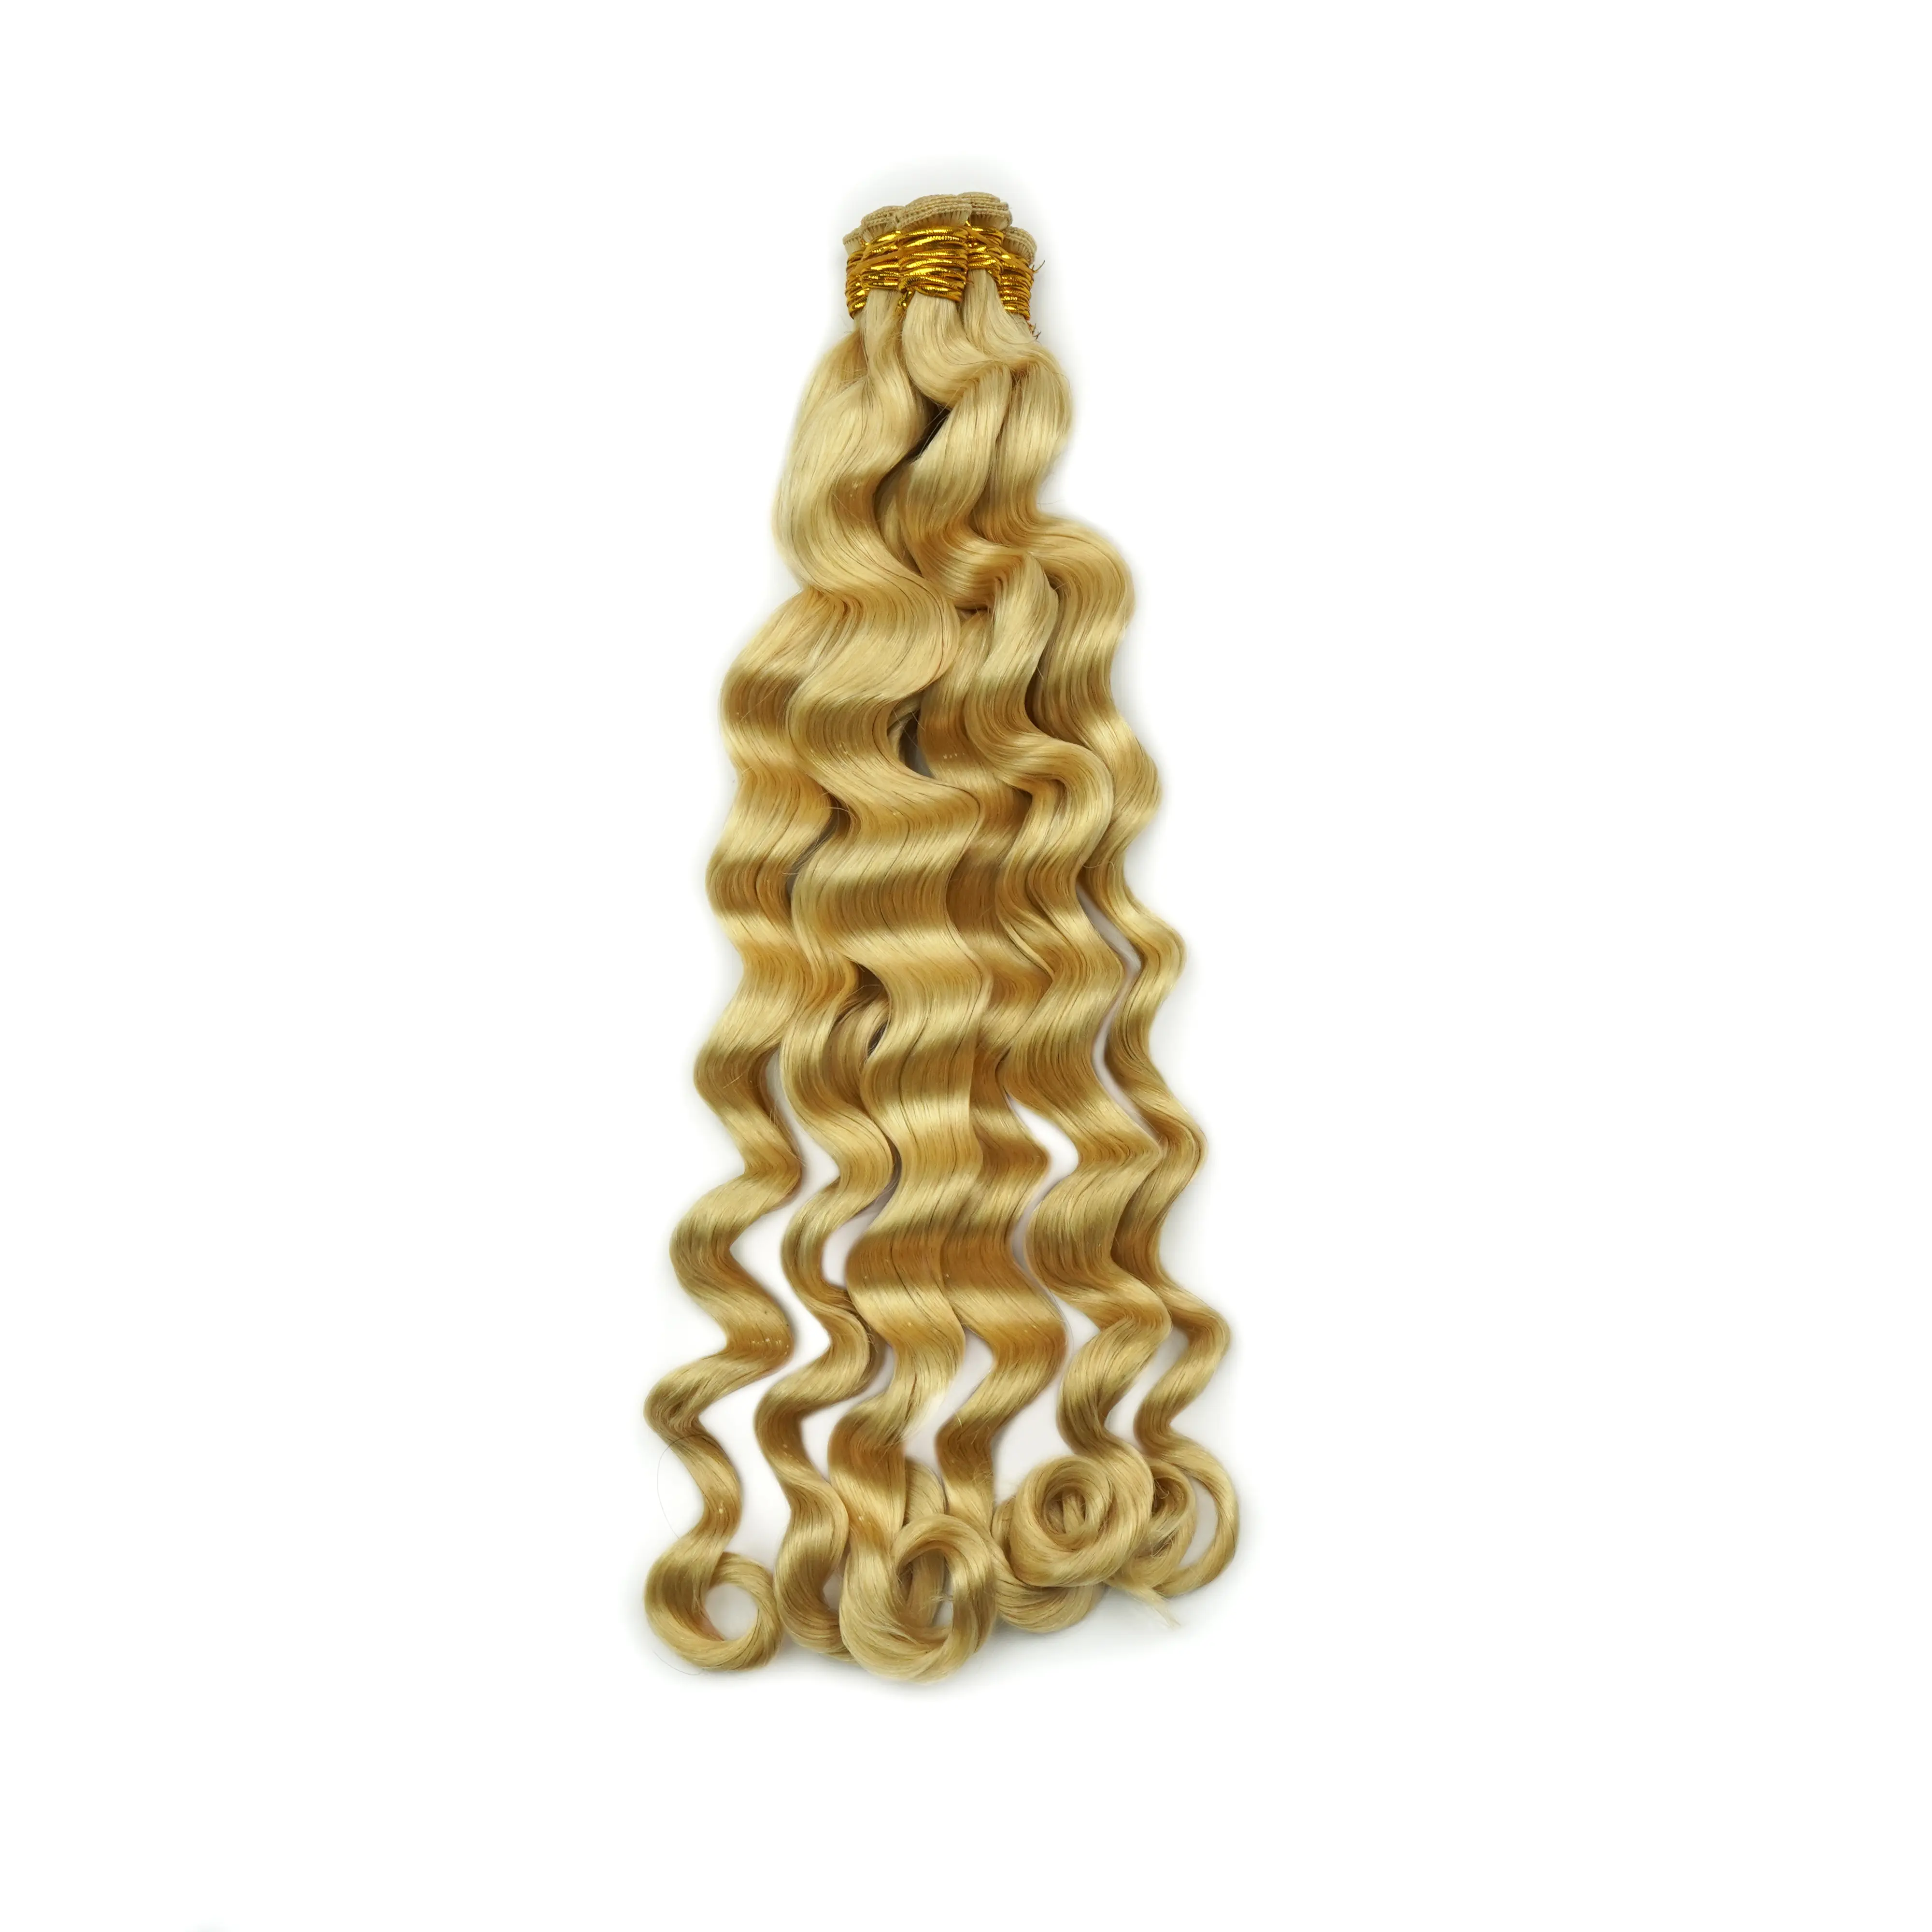 Best quality Curly Hair cuticle intact Hand tied Weft Russian Hair Cuticle Aligned Double Drawn handtied weft extensions